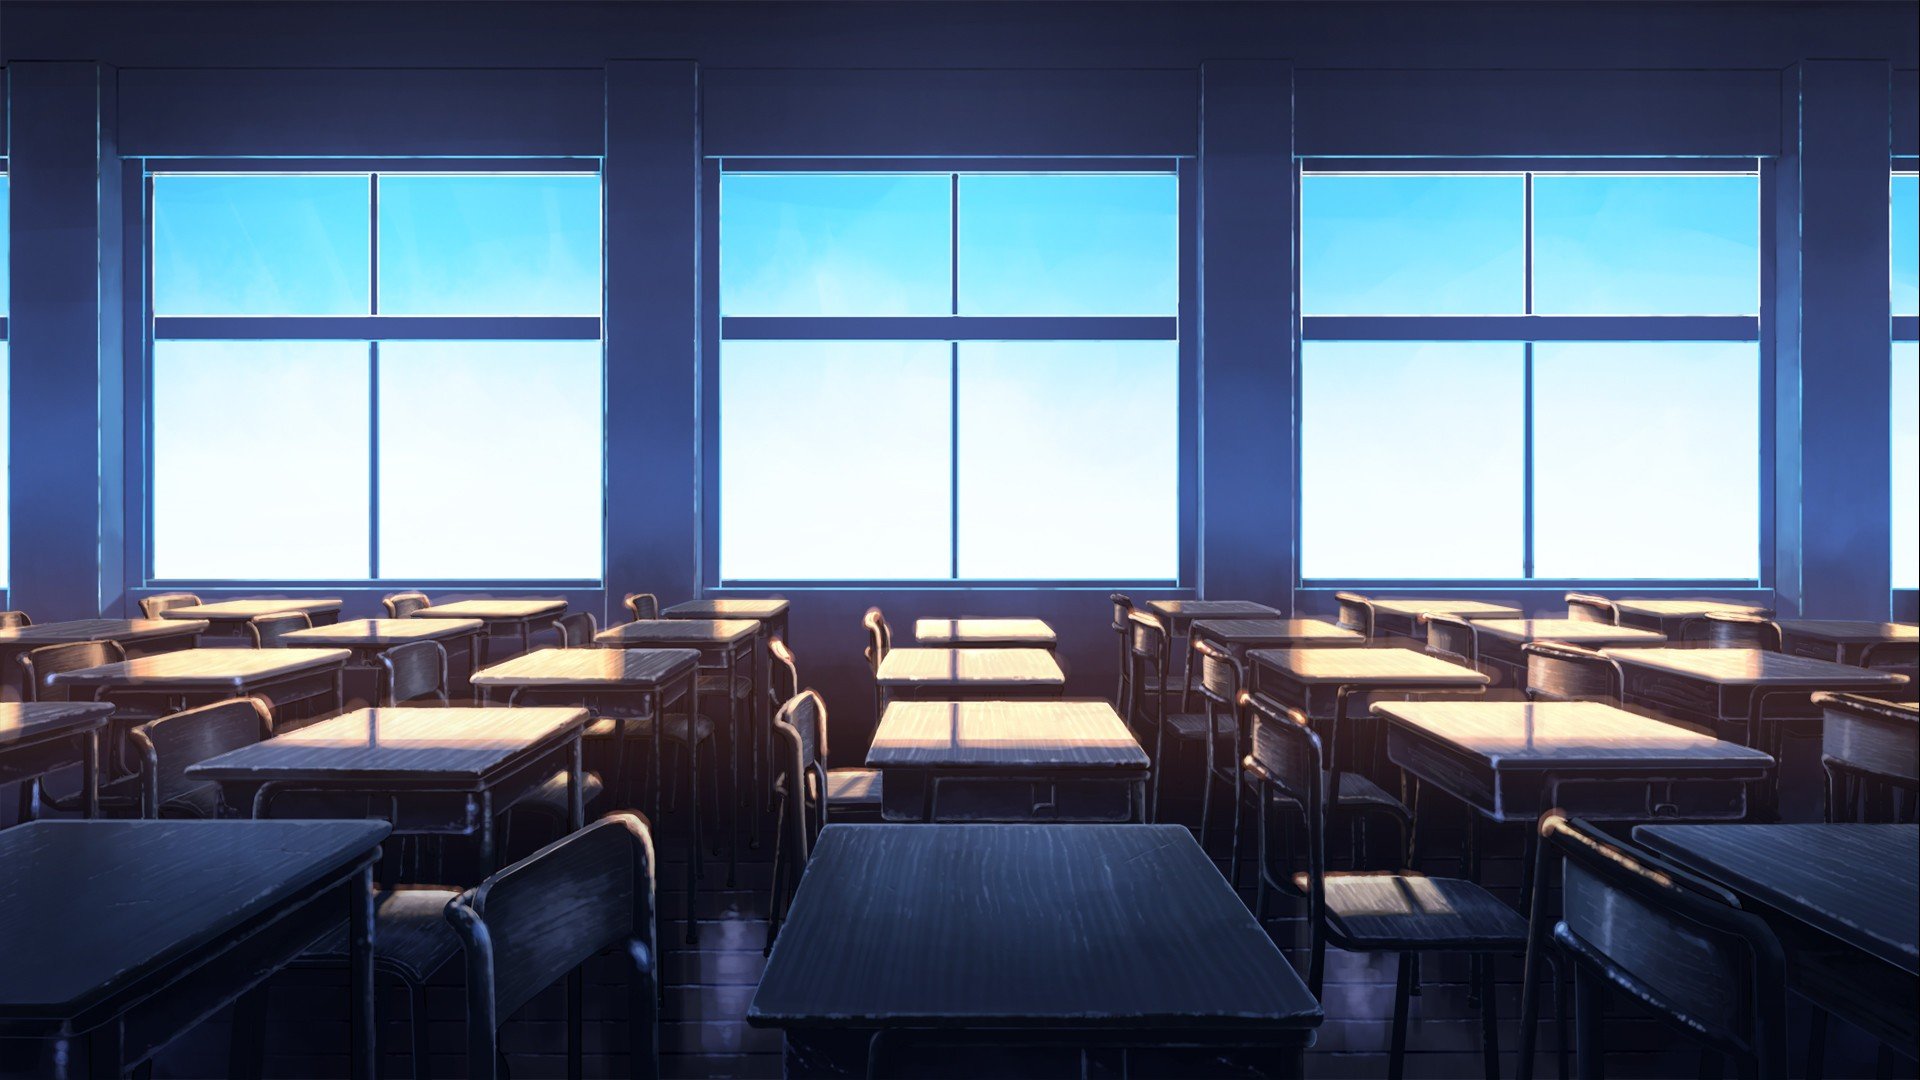 awesome wallpapers hd school